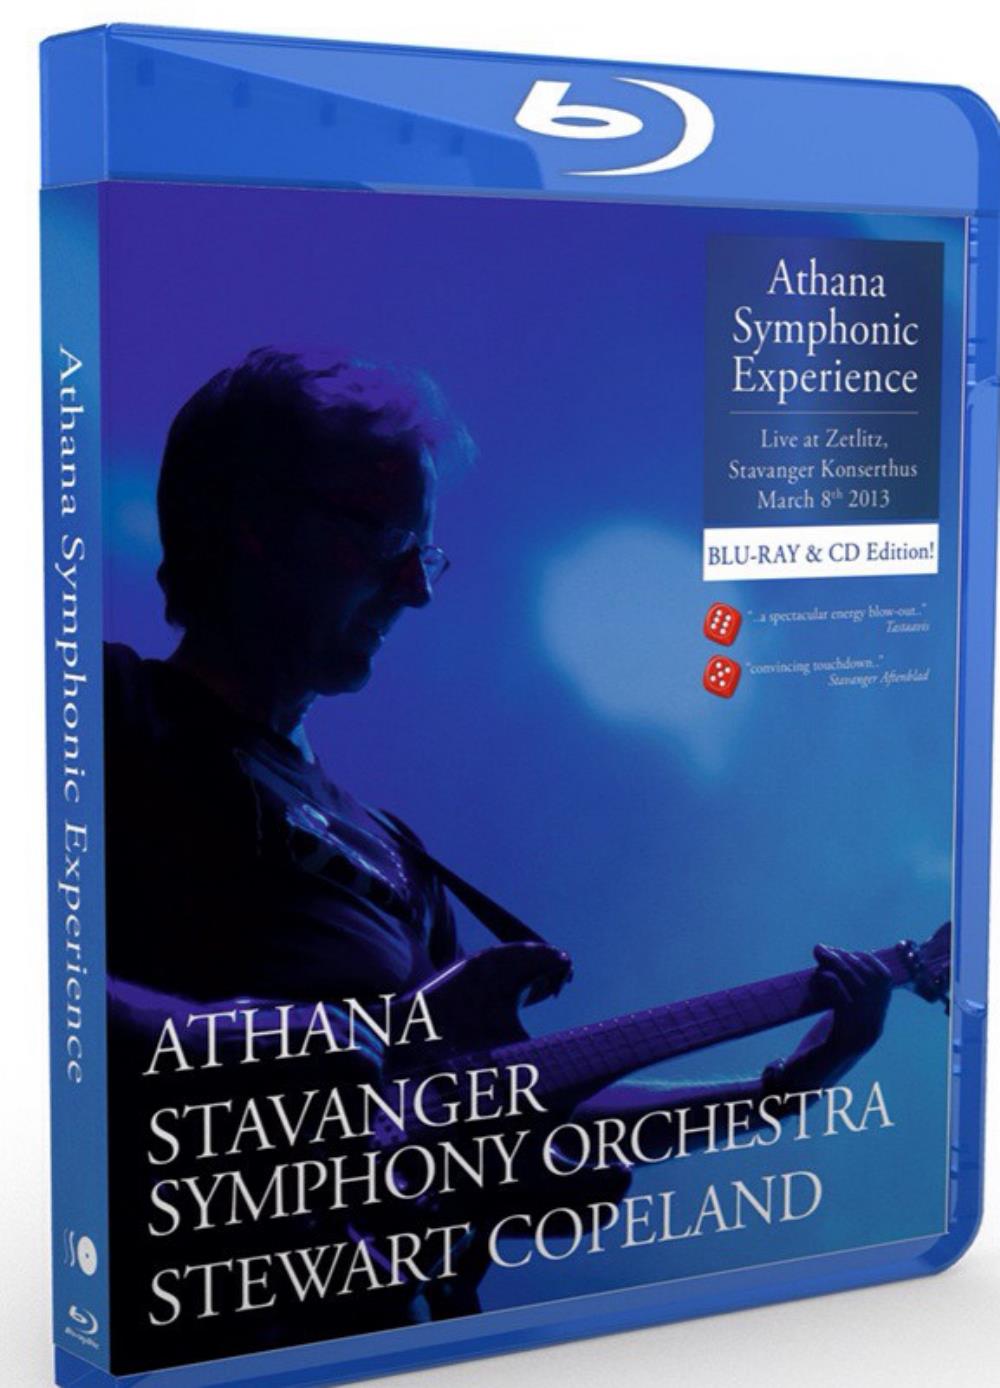 Stewart Copeland Athana Symphonic Experience (with Athana / Stavanger Symphony Orchestra) album cover